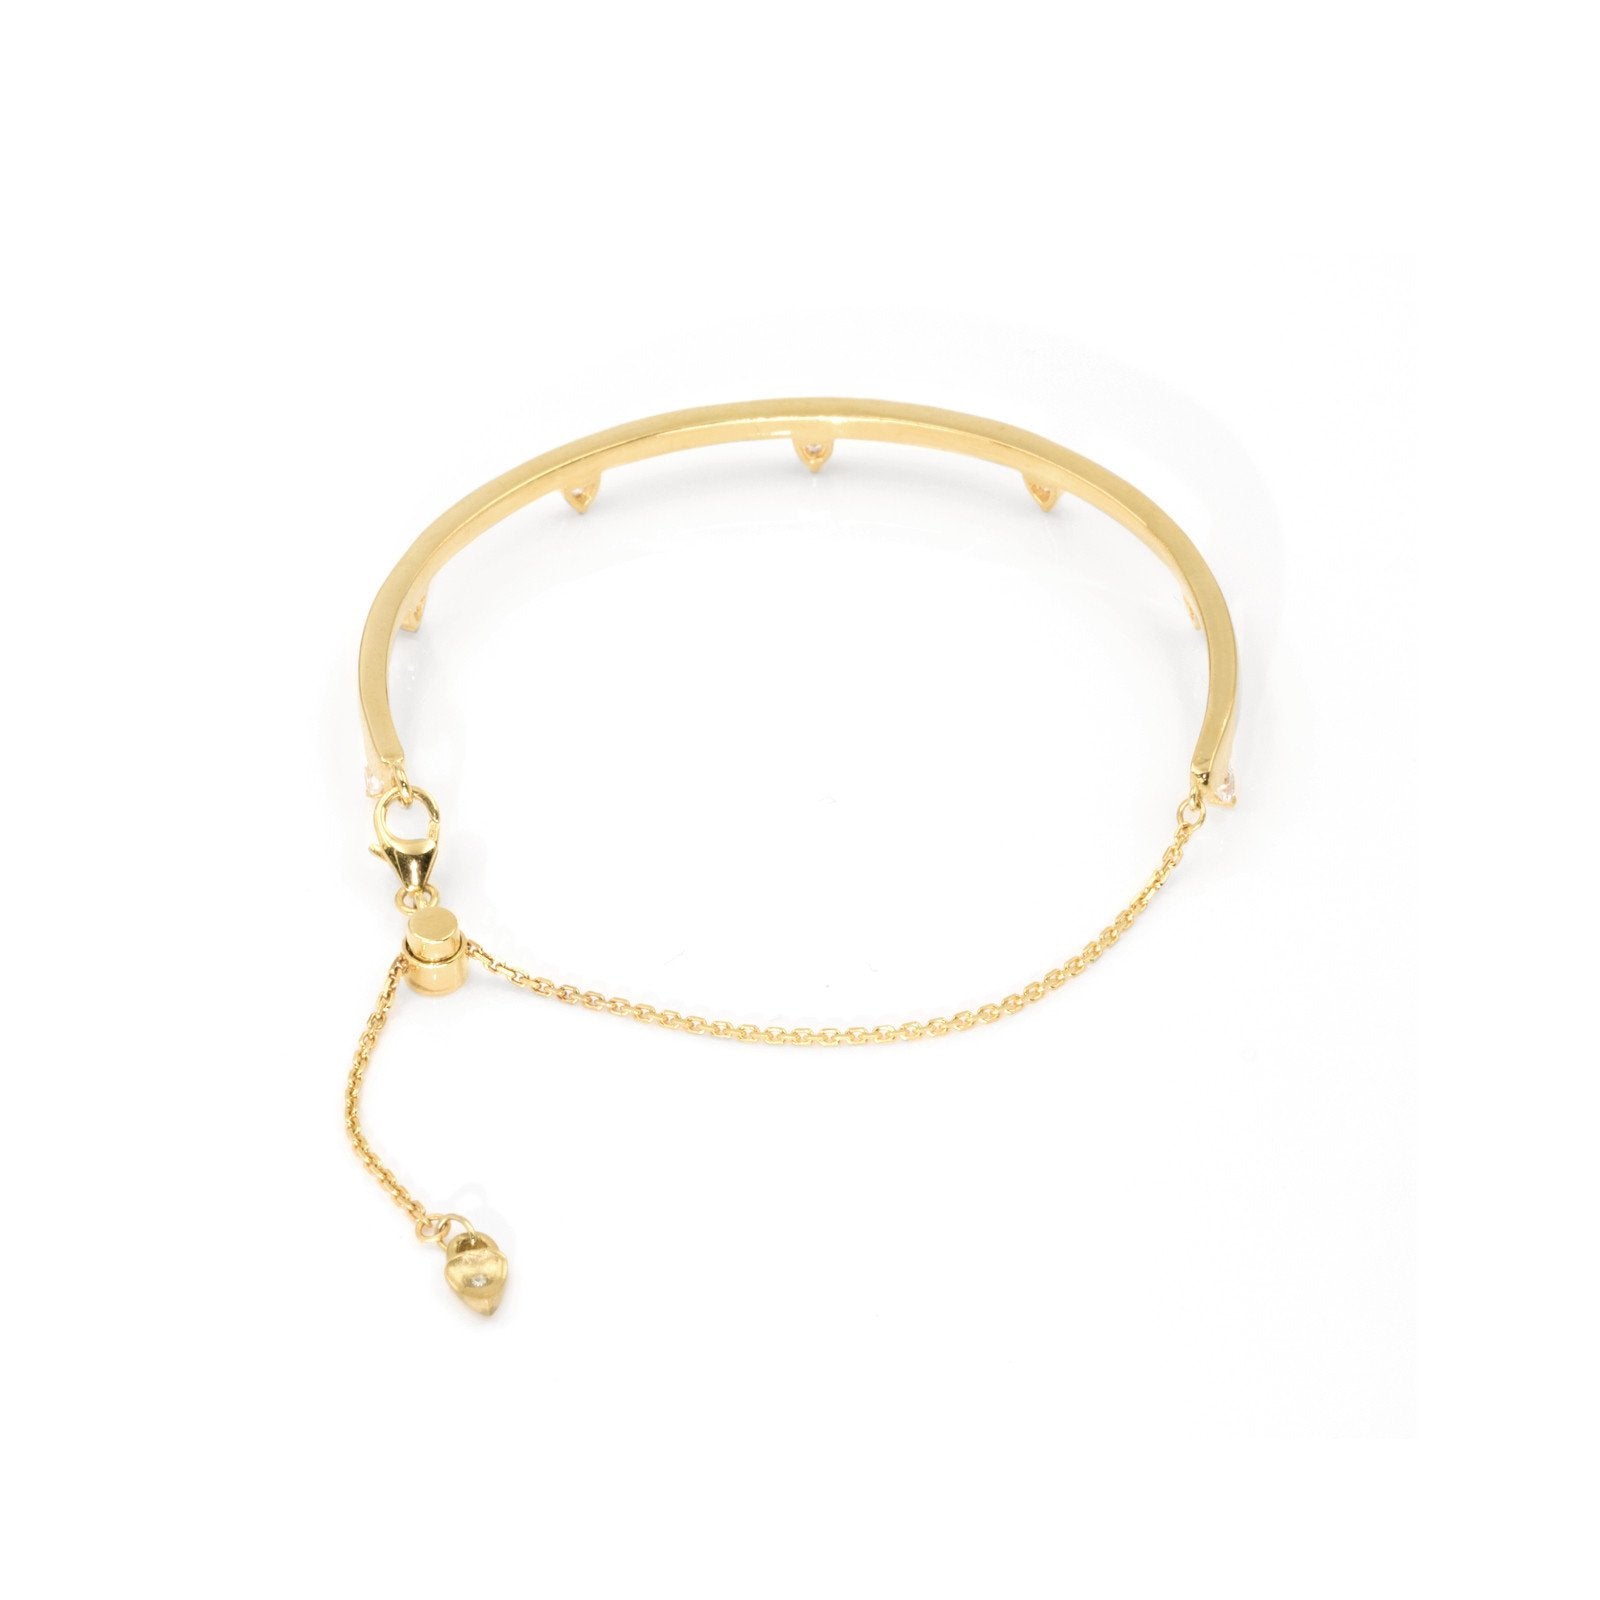 Theia - Vermeil &amp; Sterling Silver Station Bracelet - Camille Jewelry